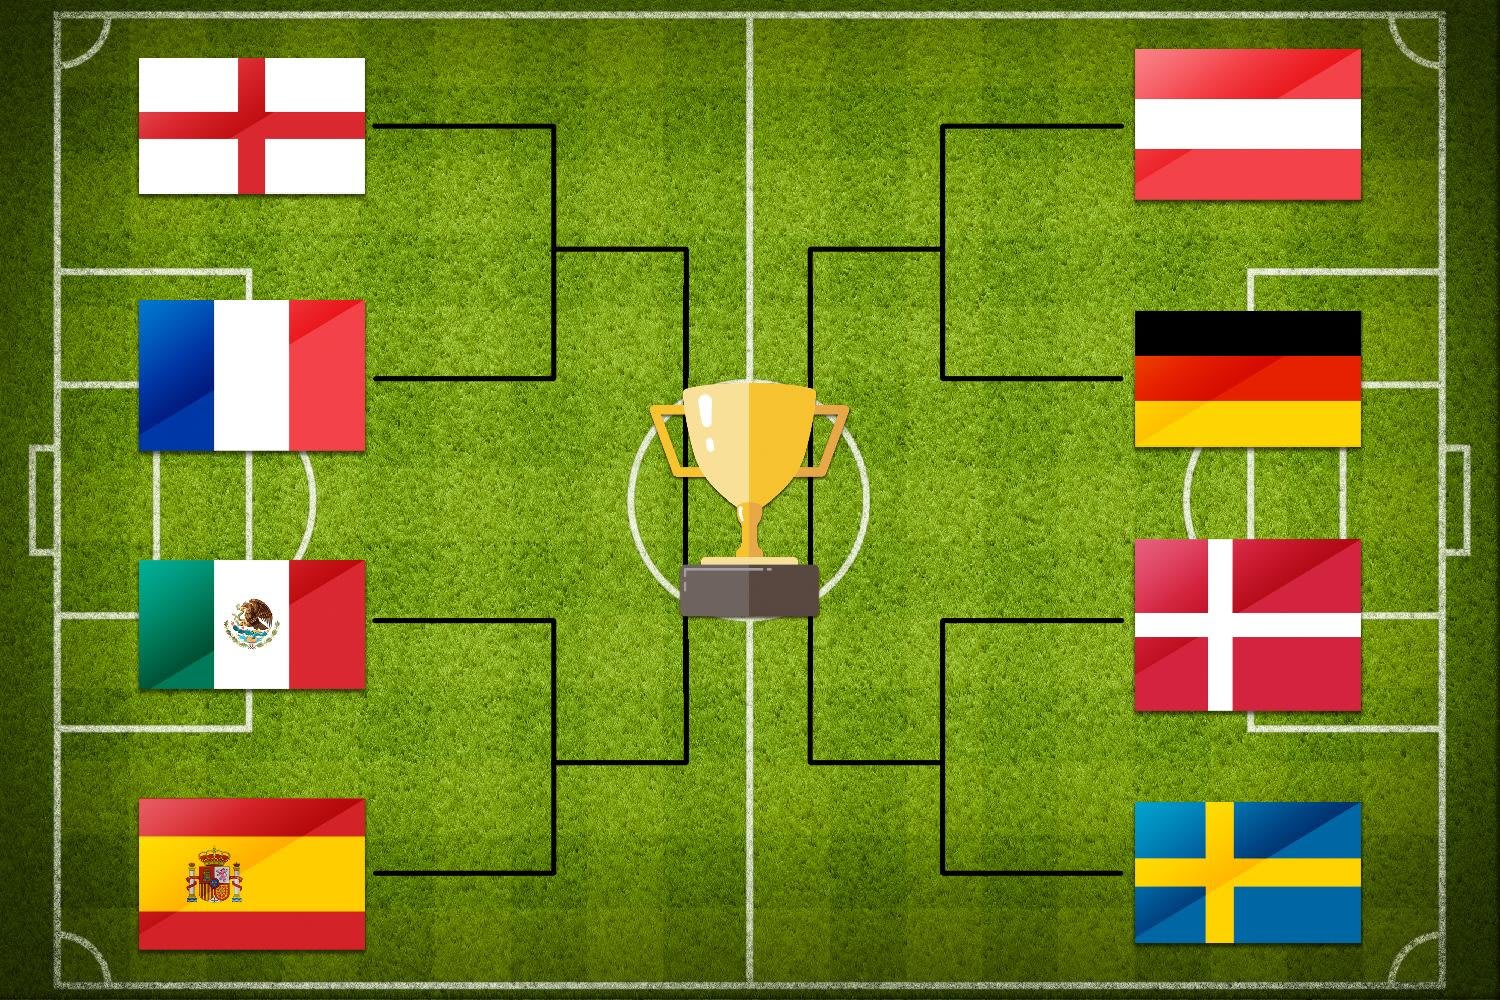 GUESS THE FOOTBALL TEAM BY PLAYERS' NATIONALITY